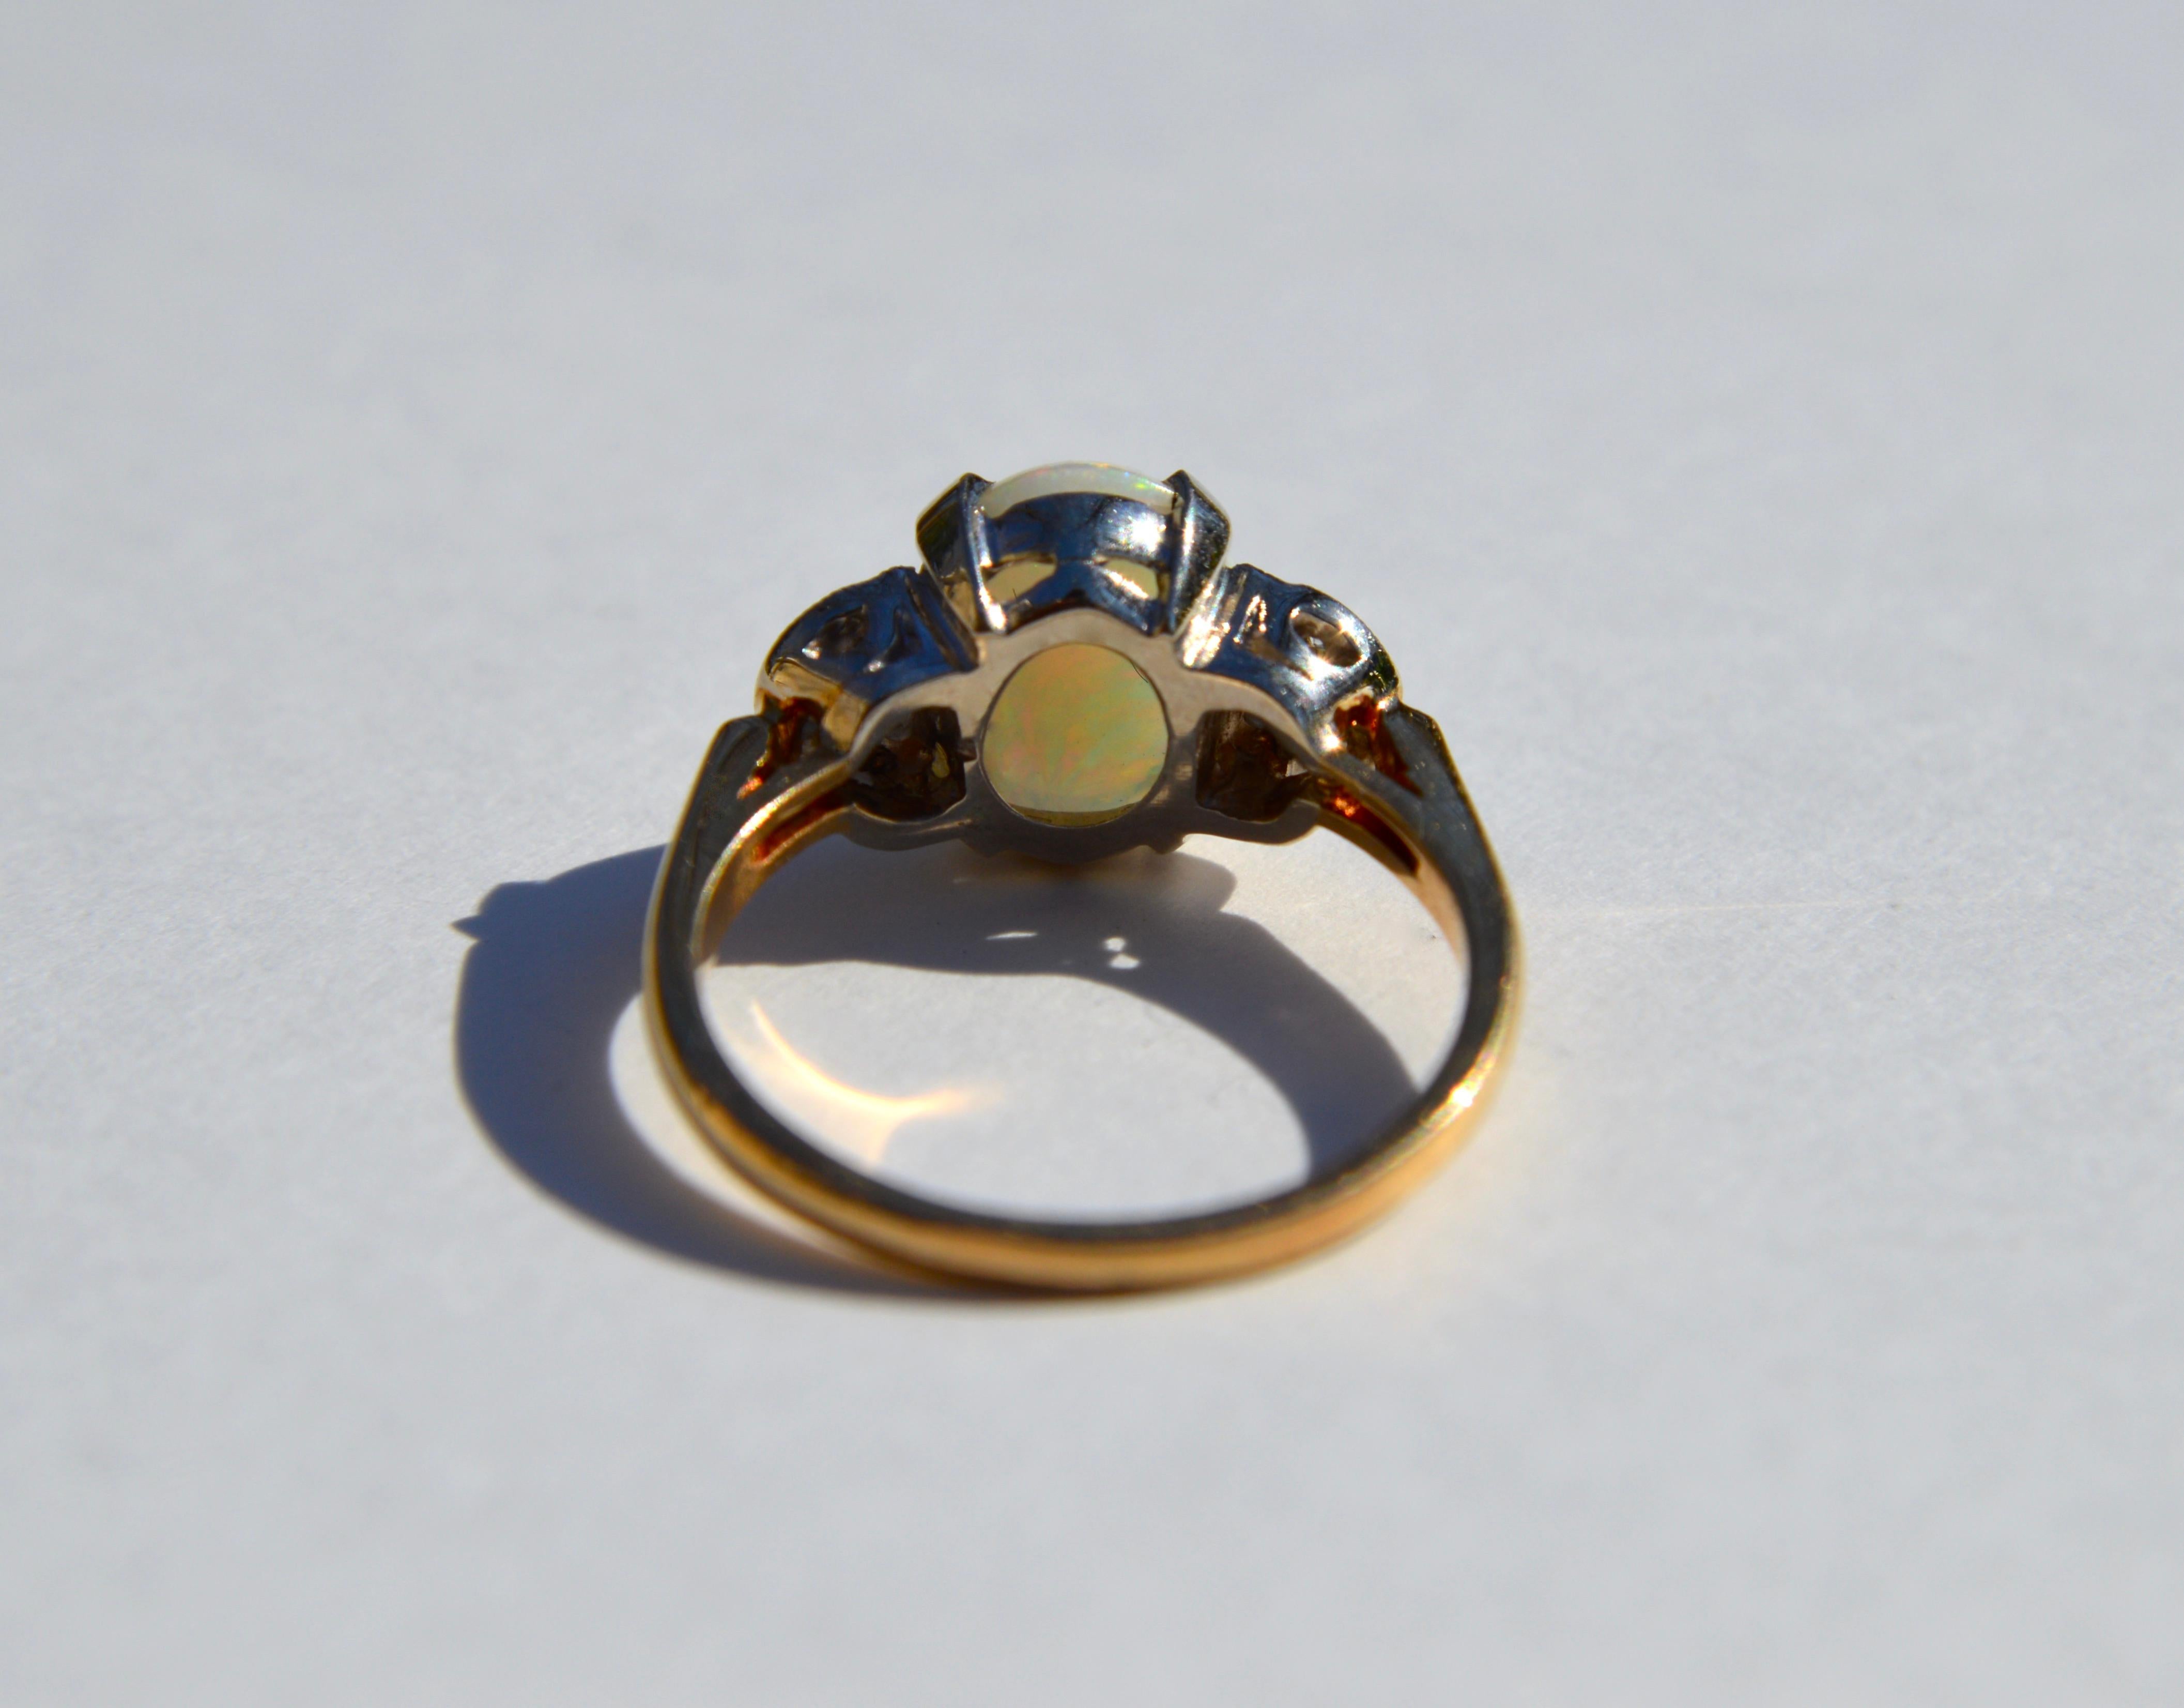 Vintage 1950s 2.54 Carat Opal Diamond 14 Karat Gold Floral Ring In Good Condition For Sale In Crownsville, MD